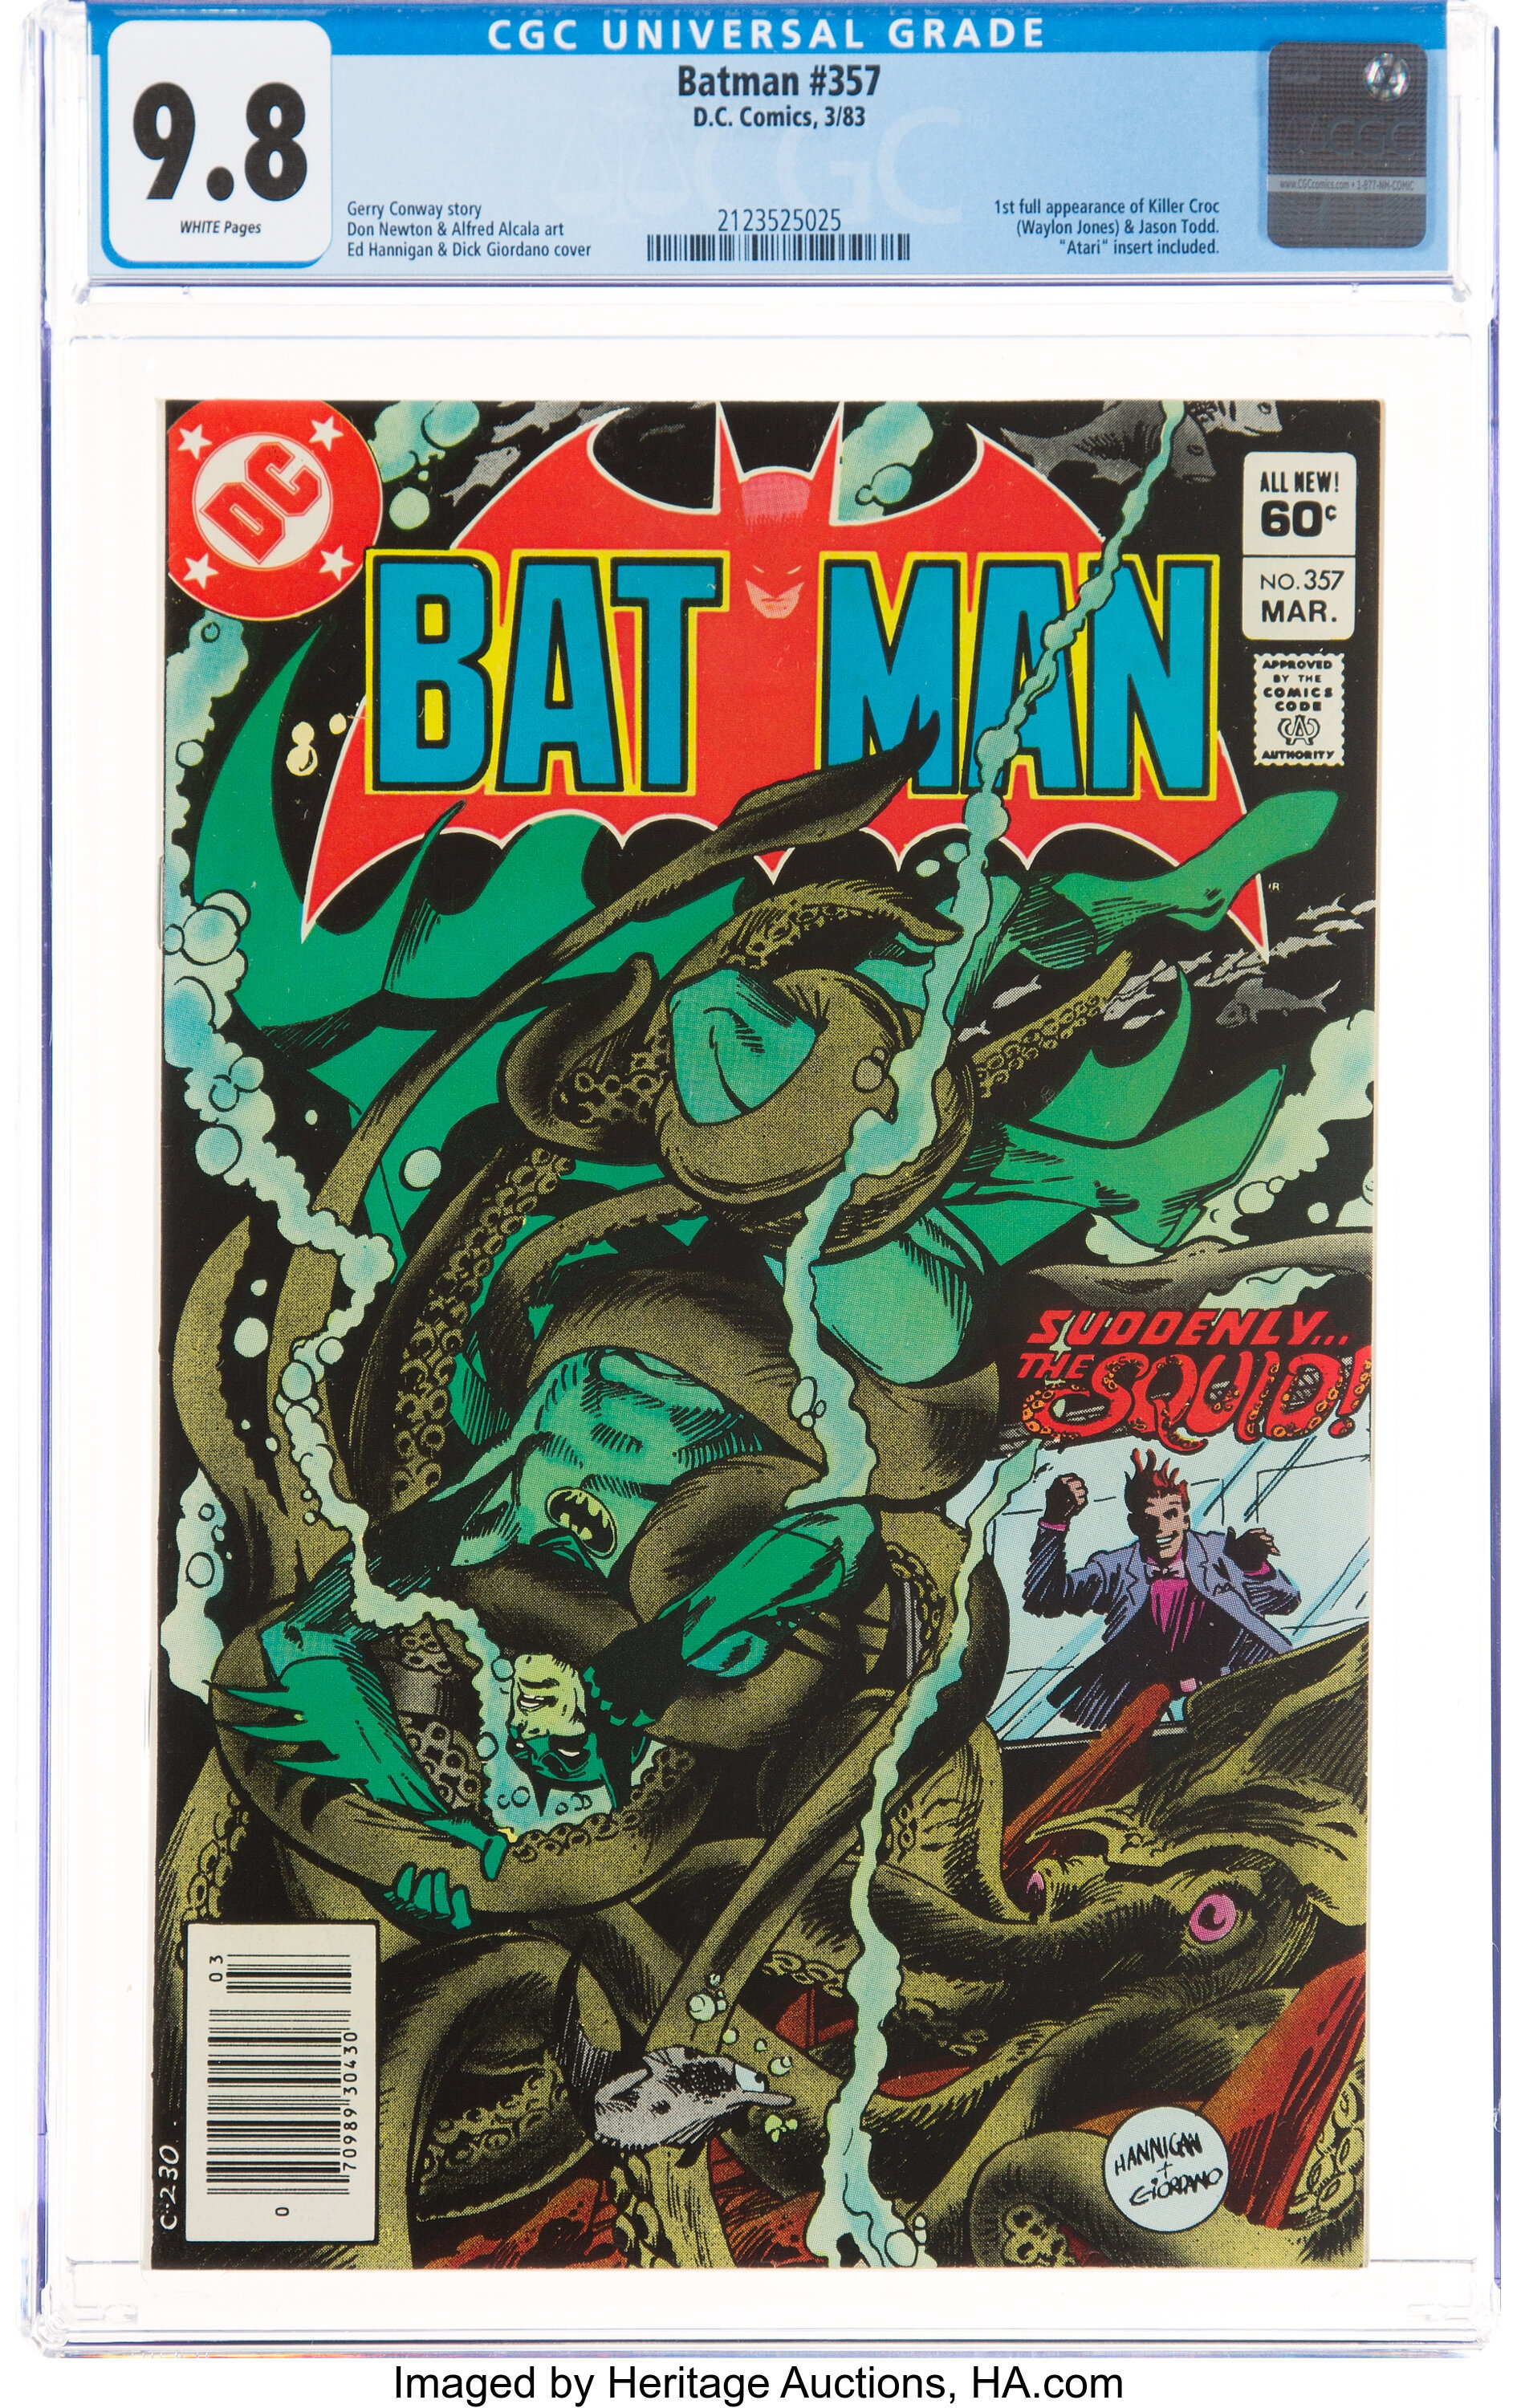 How Much Is Batman #357 Worth? Browse Comic Prices | Heritage Auctions